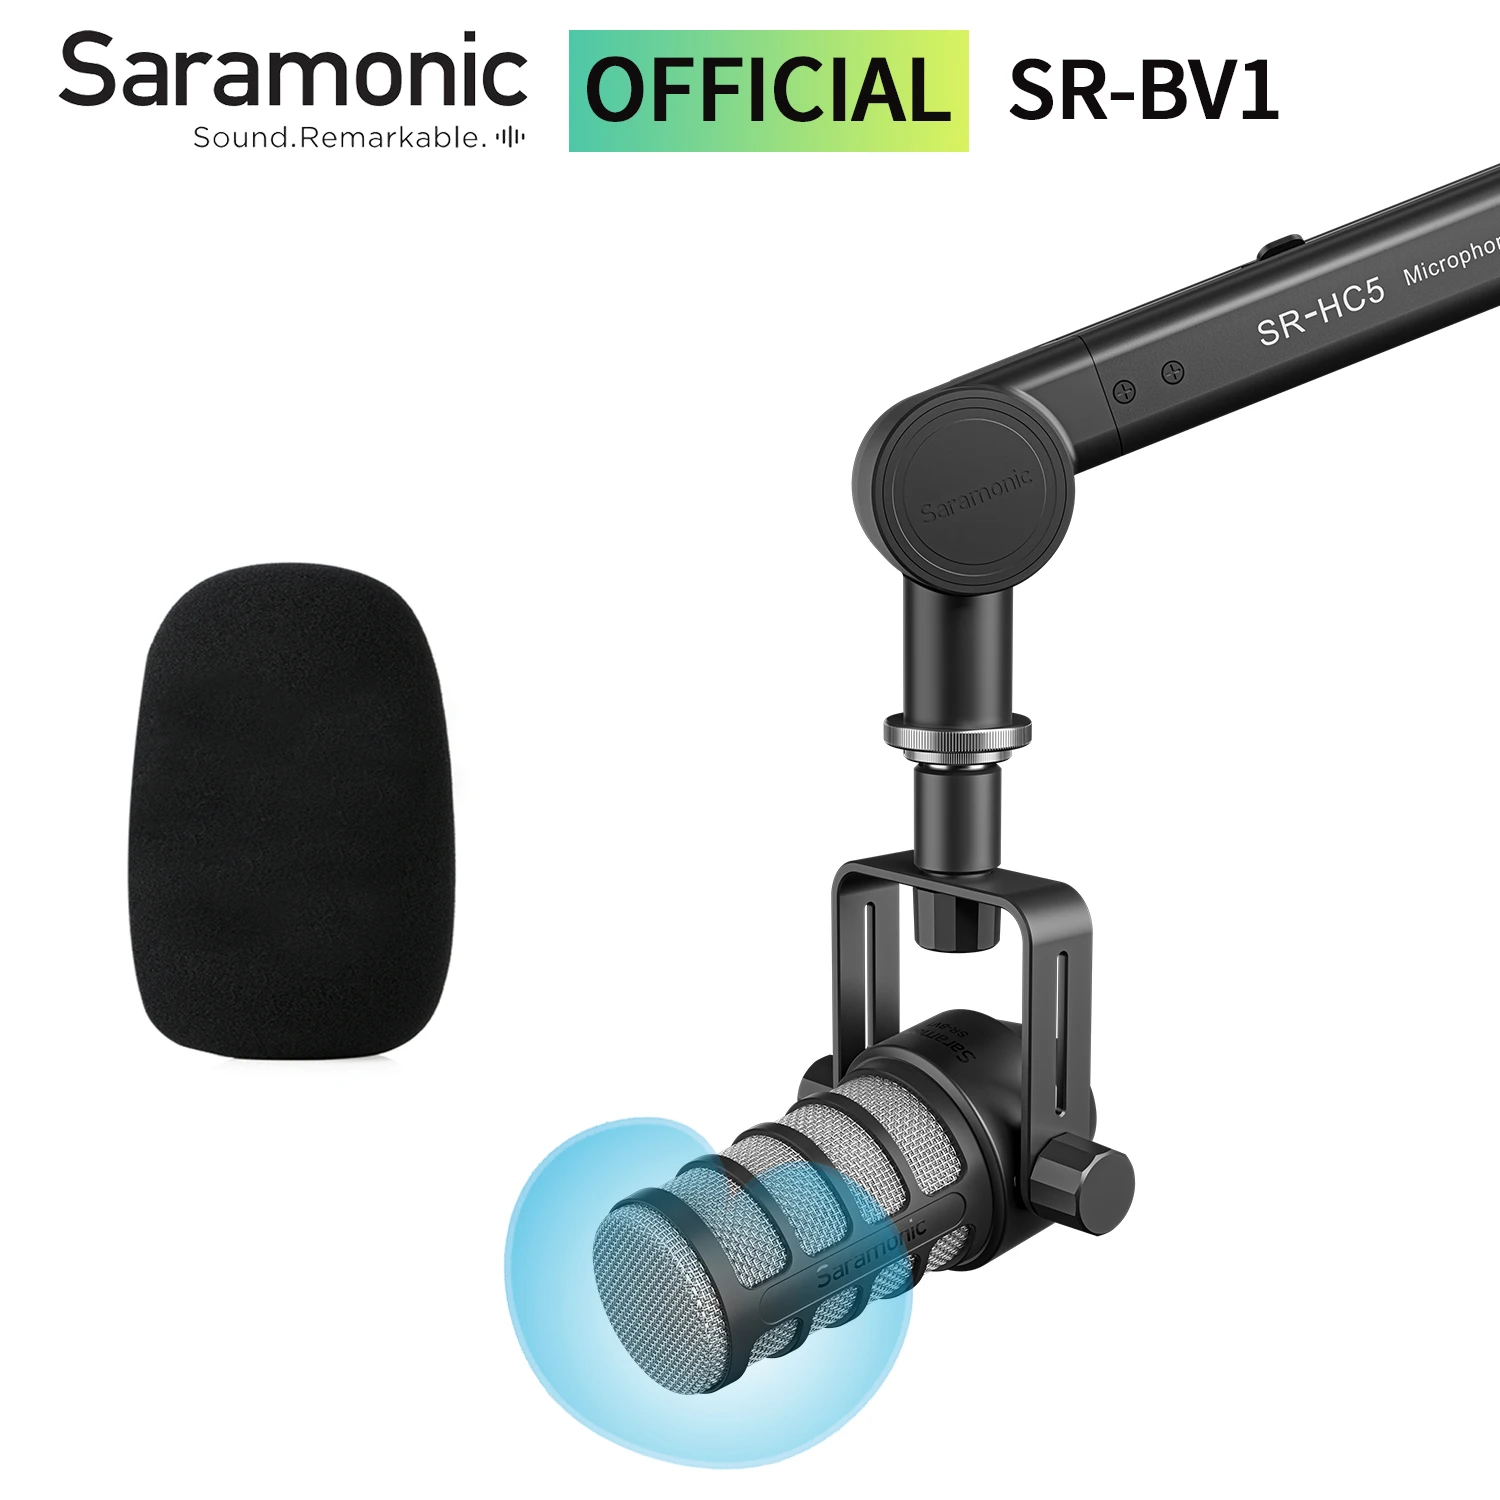 Saramonic SR-BV1 Cardioid Broadcasting Dynamic Microphone for Live Streaming Bodcasting Podcasting Recording Studio Youtube wireless microphone